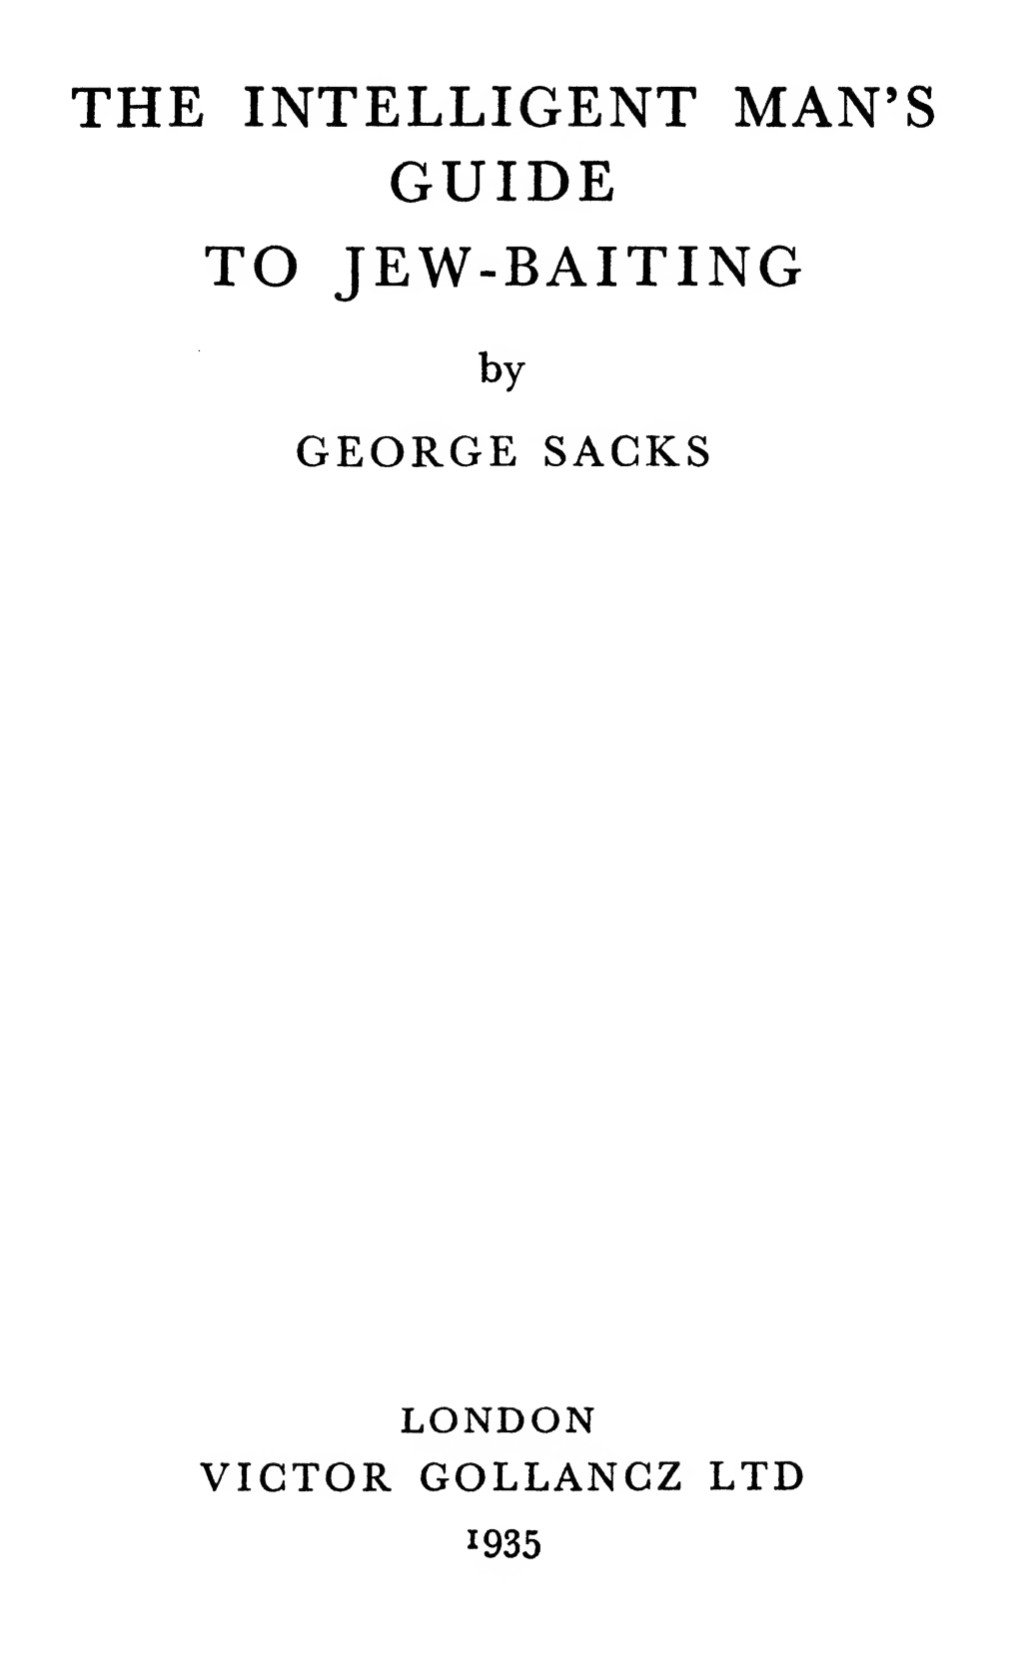 The Intelligent Mans Guide To Jew Baiting (1935) by George Sacks